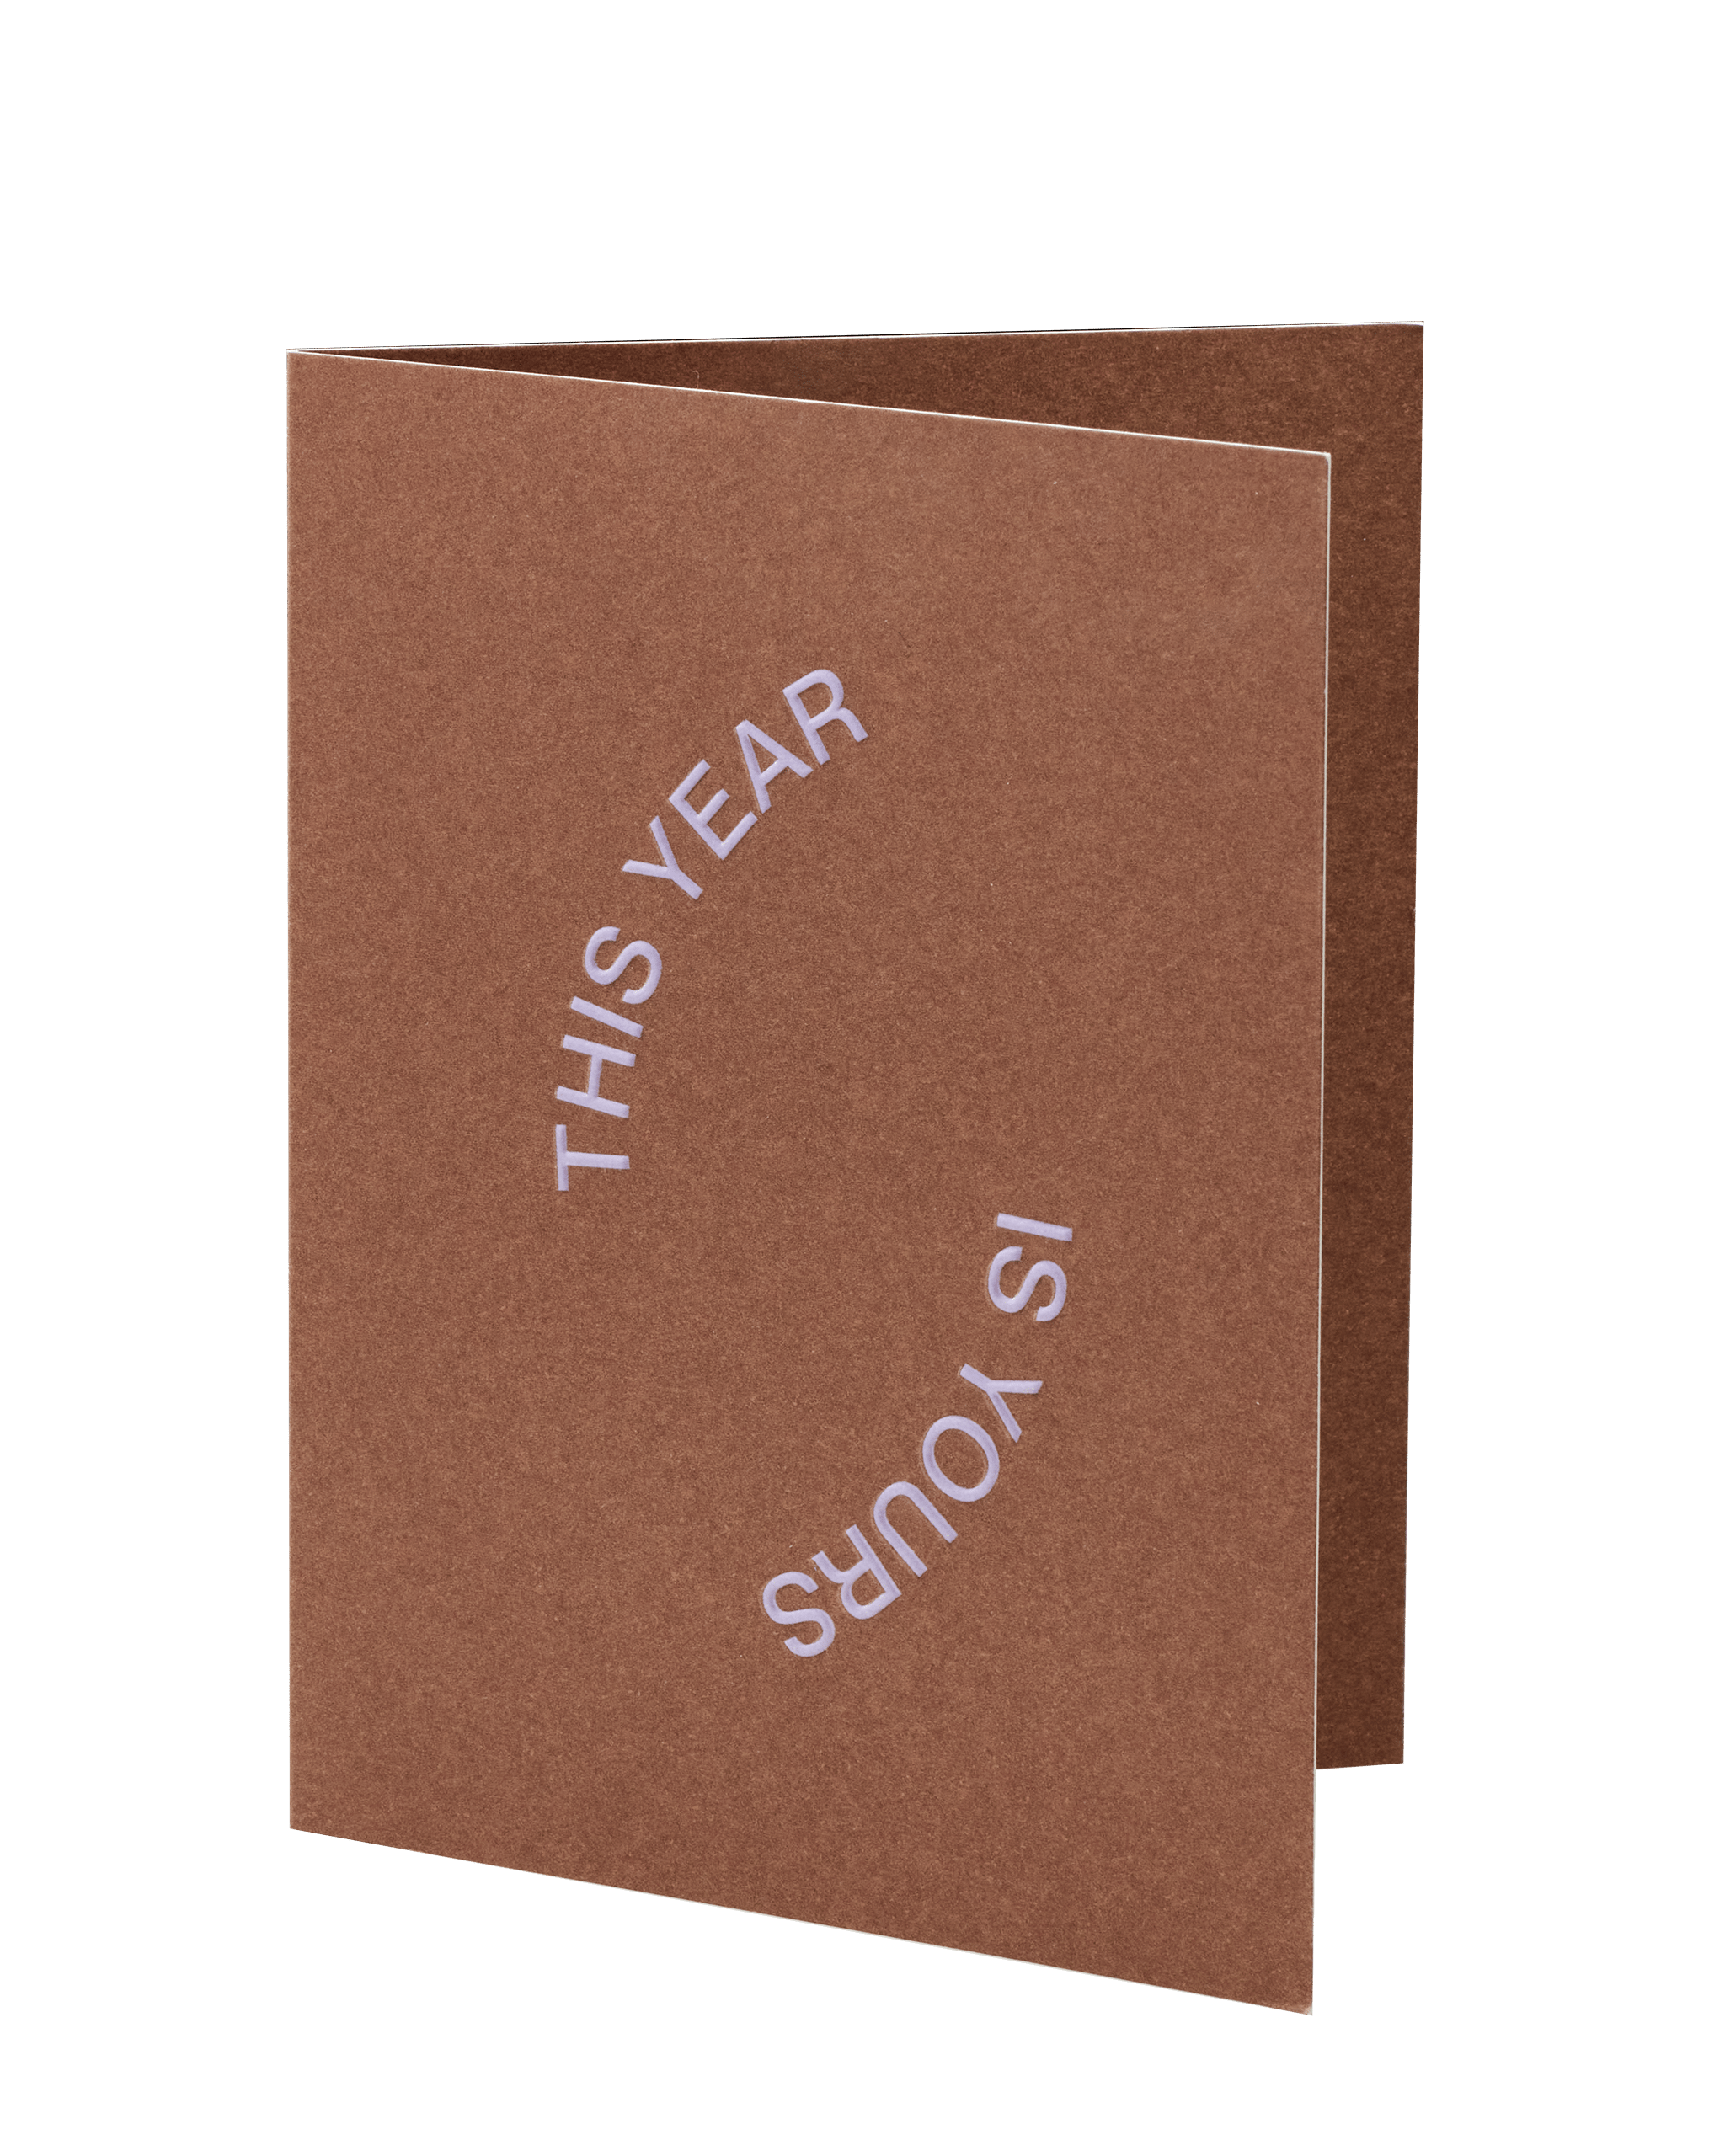 Short Talk Greeting Cards This year is yours by Short Talk